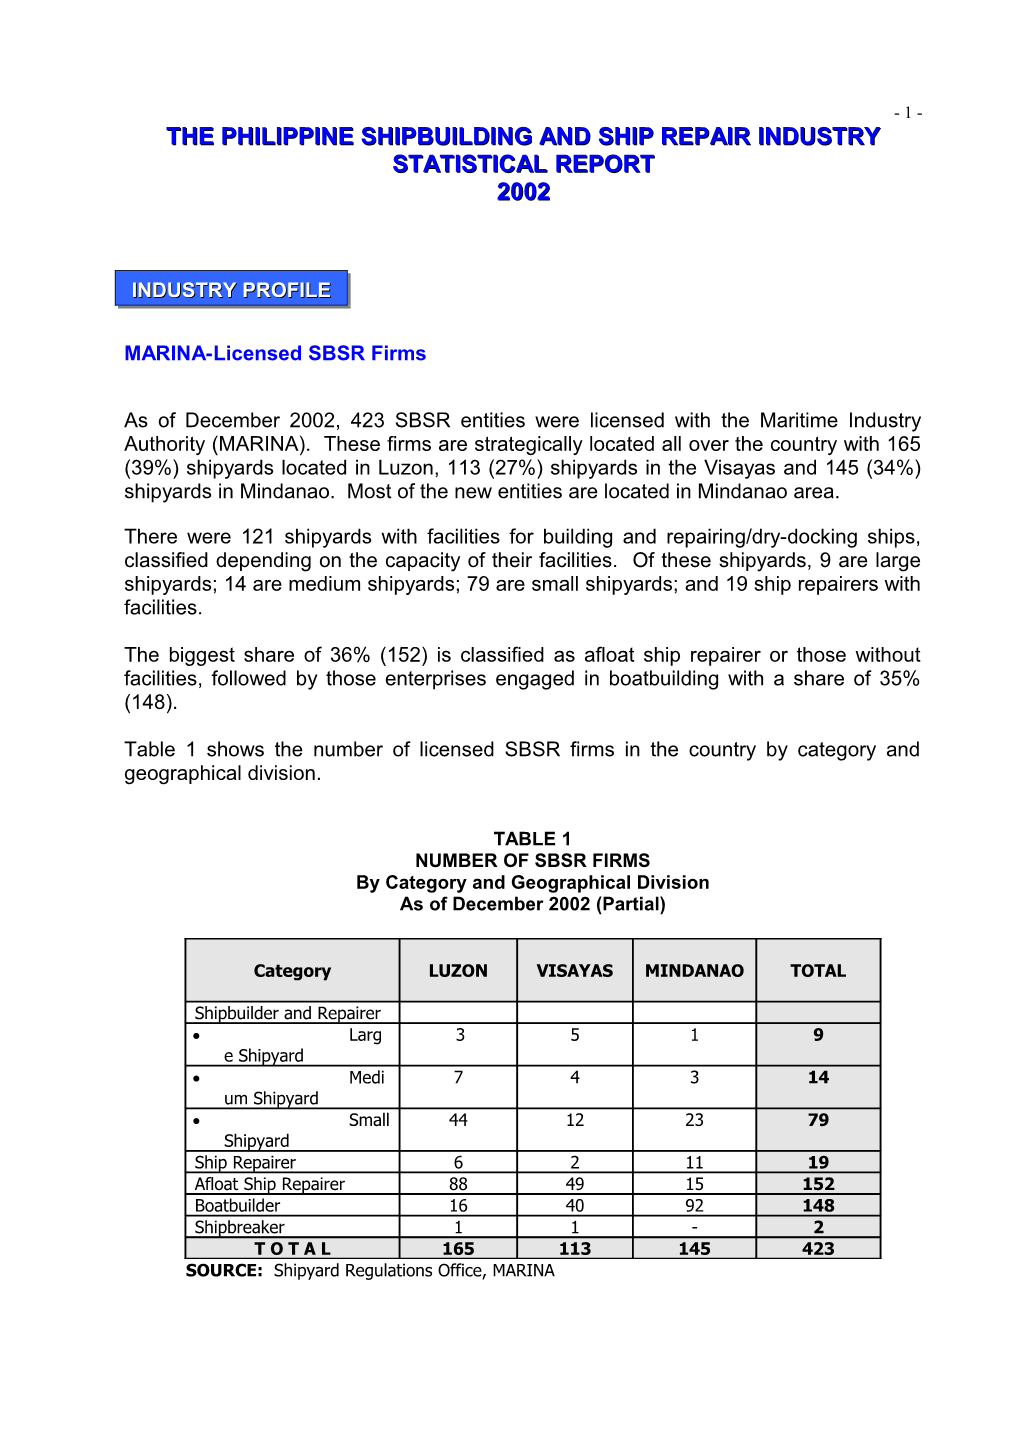 The Philippine Shipbuilding and Ship Repair Industry Statistical Report